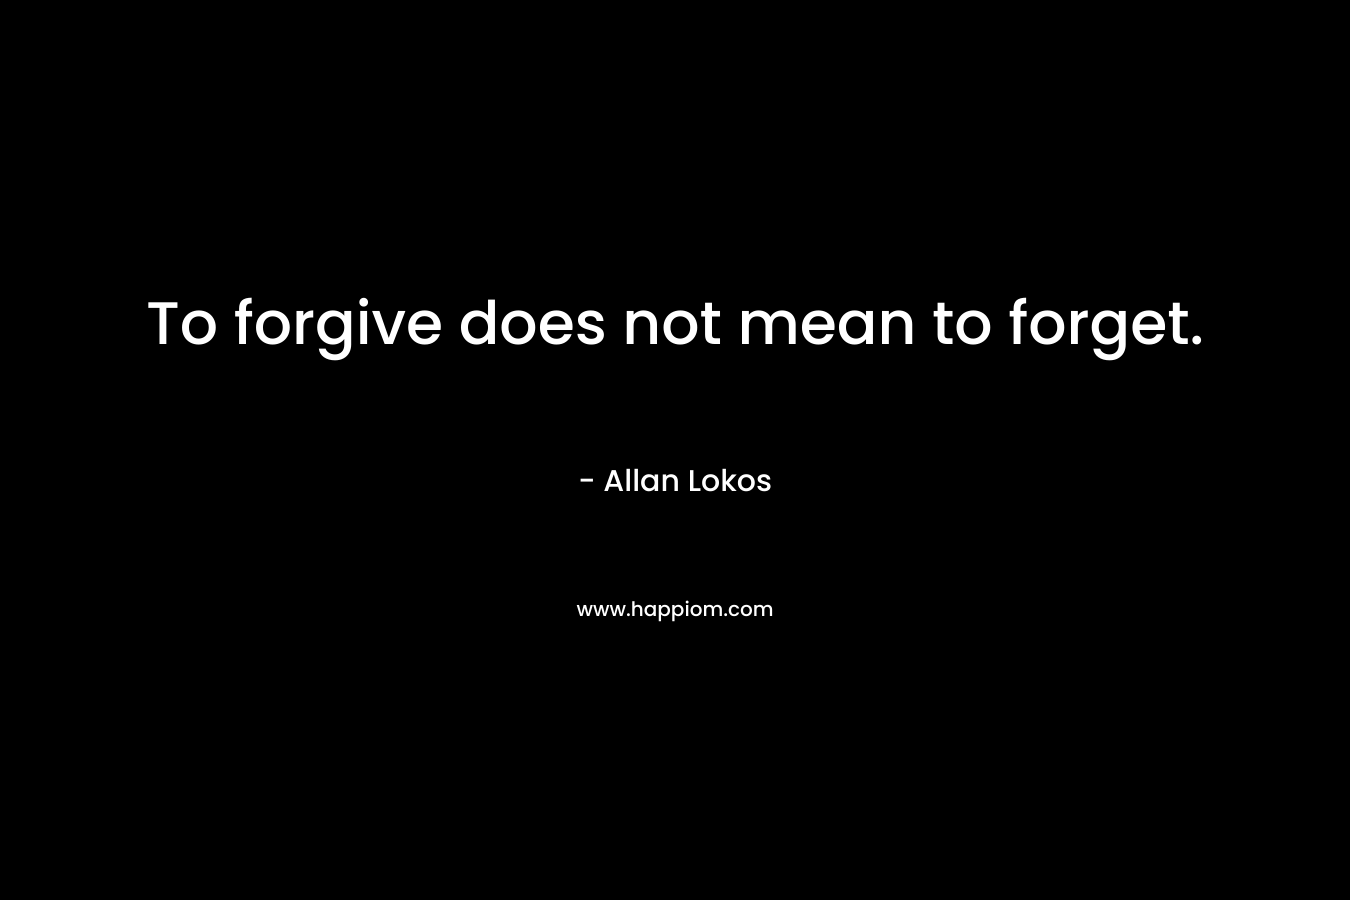 To forgive does not mean to forget. – Allan Lokos